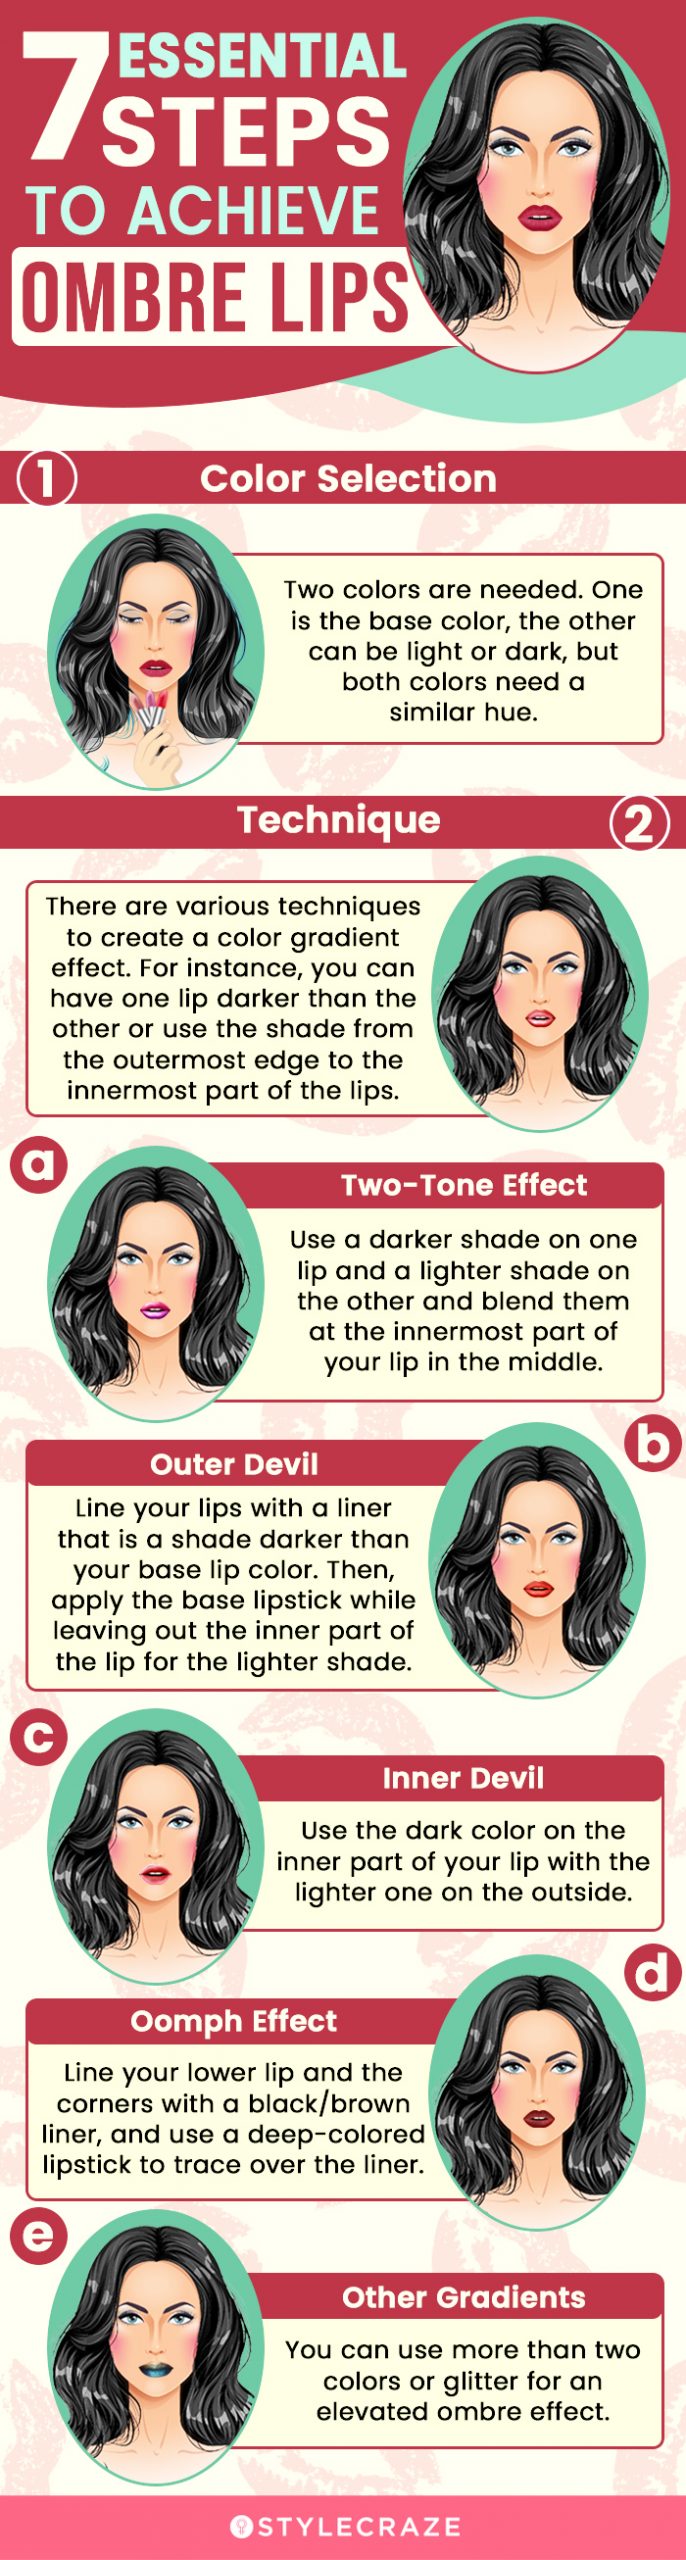 7 essential steps to achieve ombre lips (infographic)